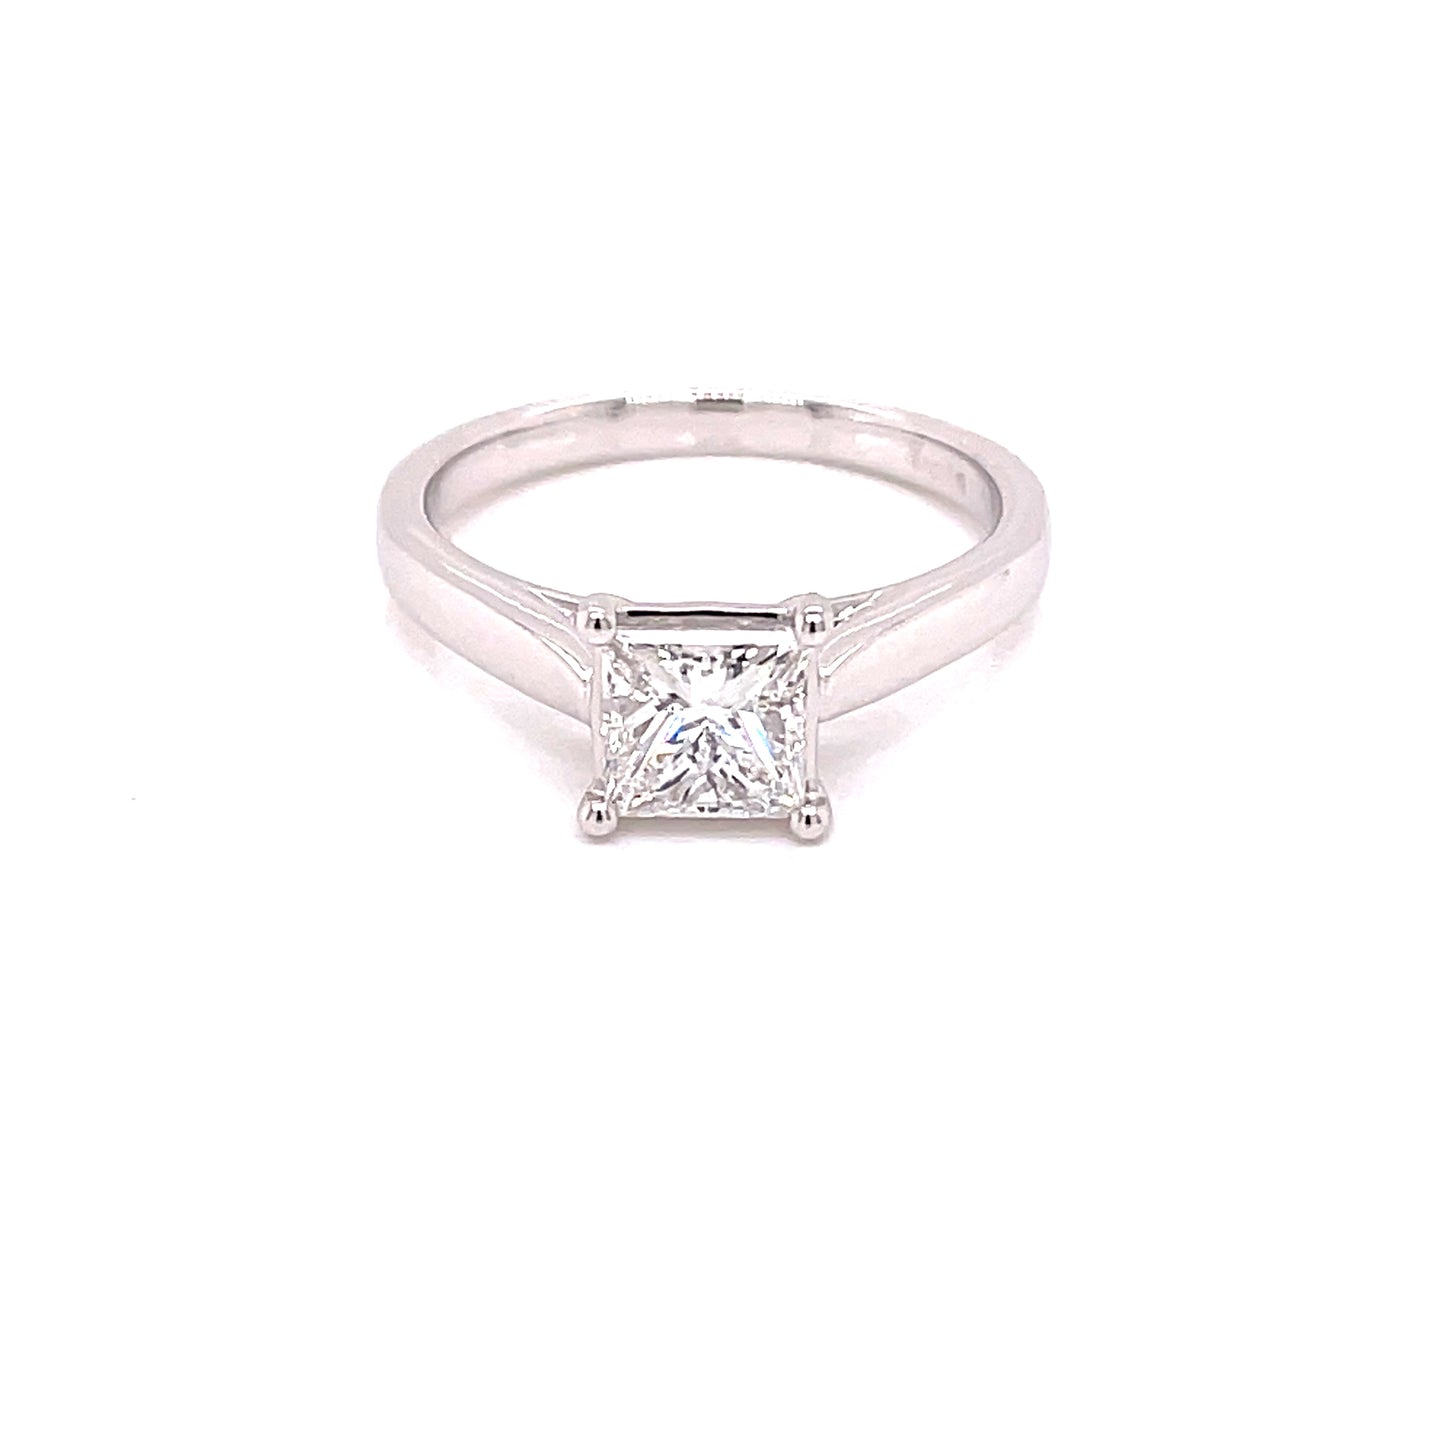 Princess Cut Diamond Solitaire Ring - 1.00cts  Gardiner Brothers   